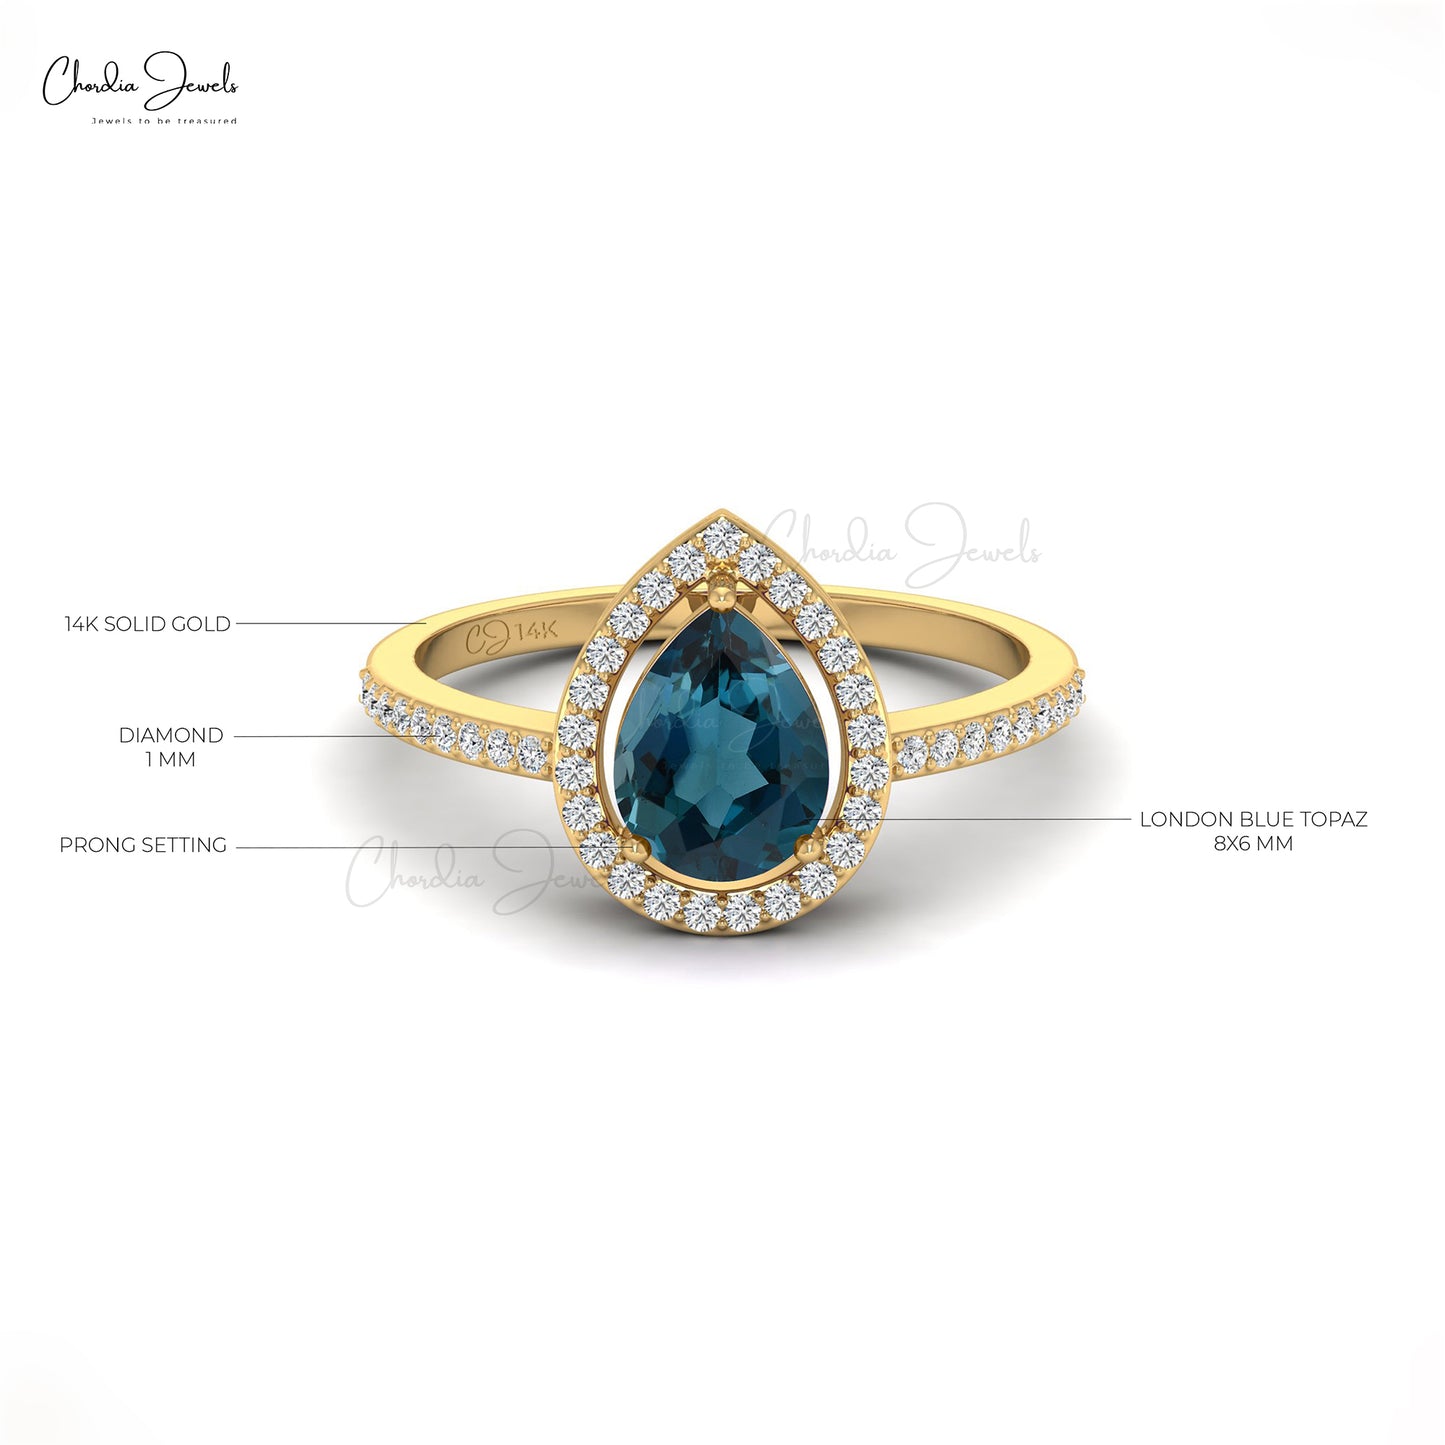 Natural London Blue Topaz Solitaire Halo Ring, 14k Solid Gold Handmade Diamond Ring, Topaz Ring Fine Jewelry, 8x6 mm Faceted Pear Cut Blue Topaz Prong Setting Halo Engagement Ring, Gifted Ring